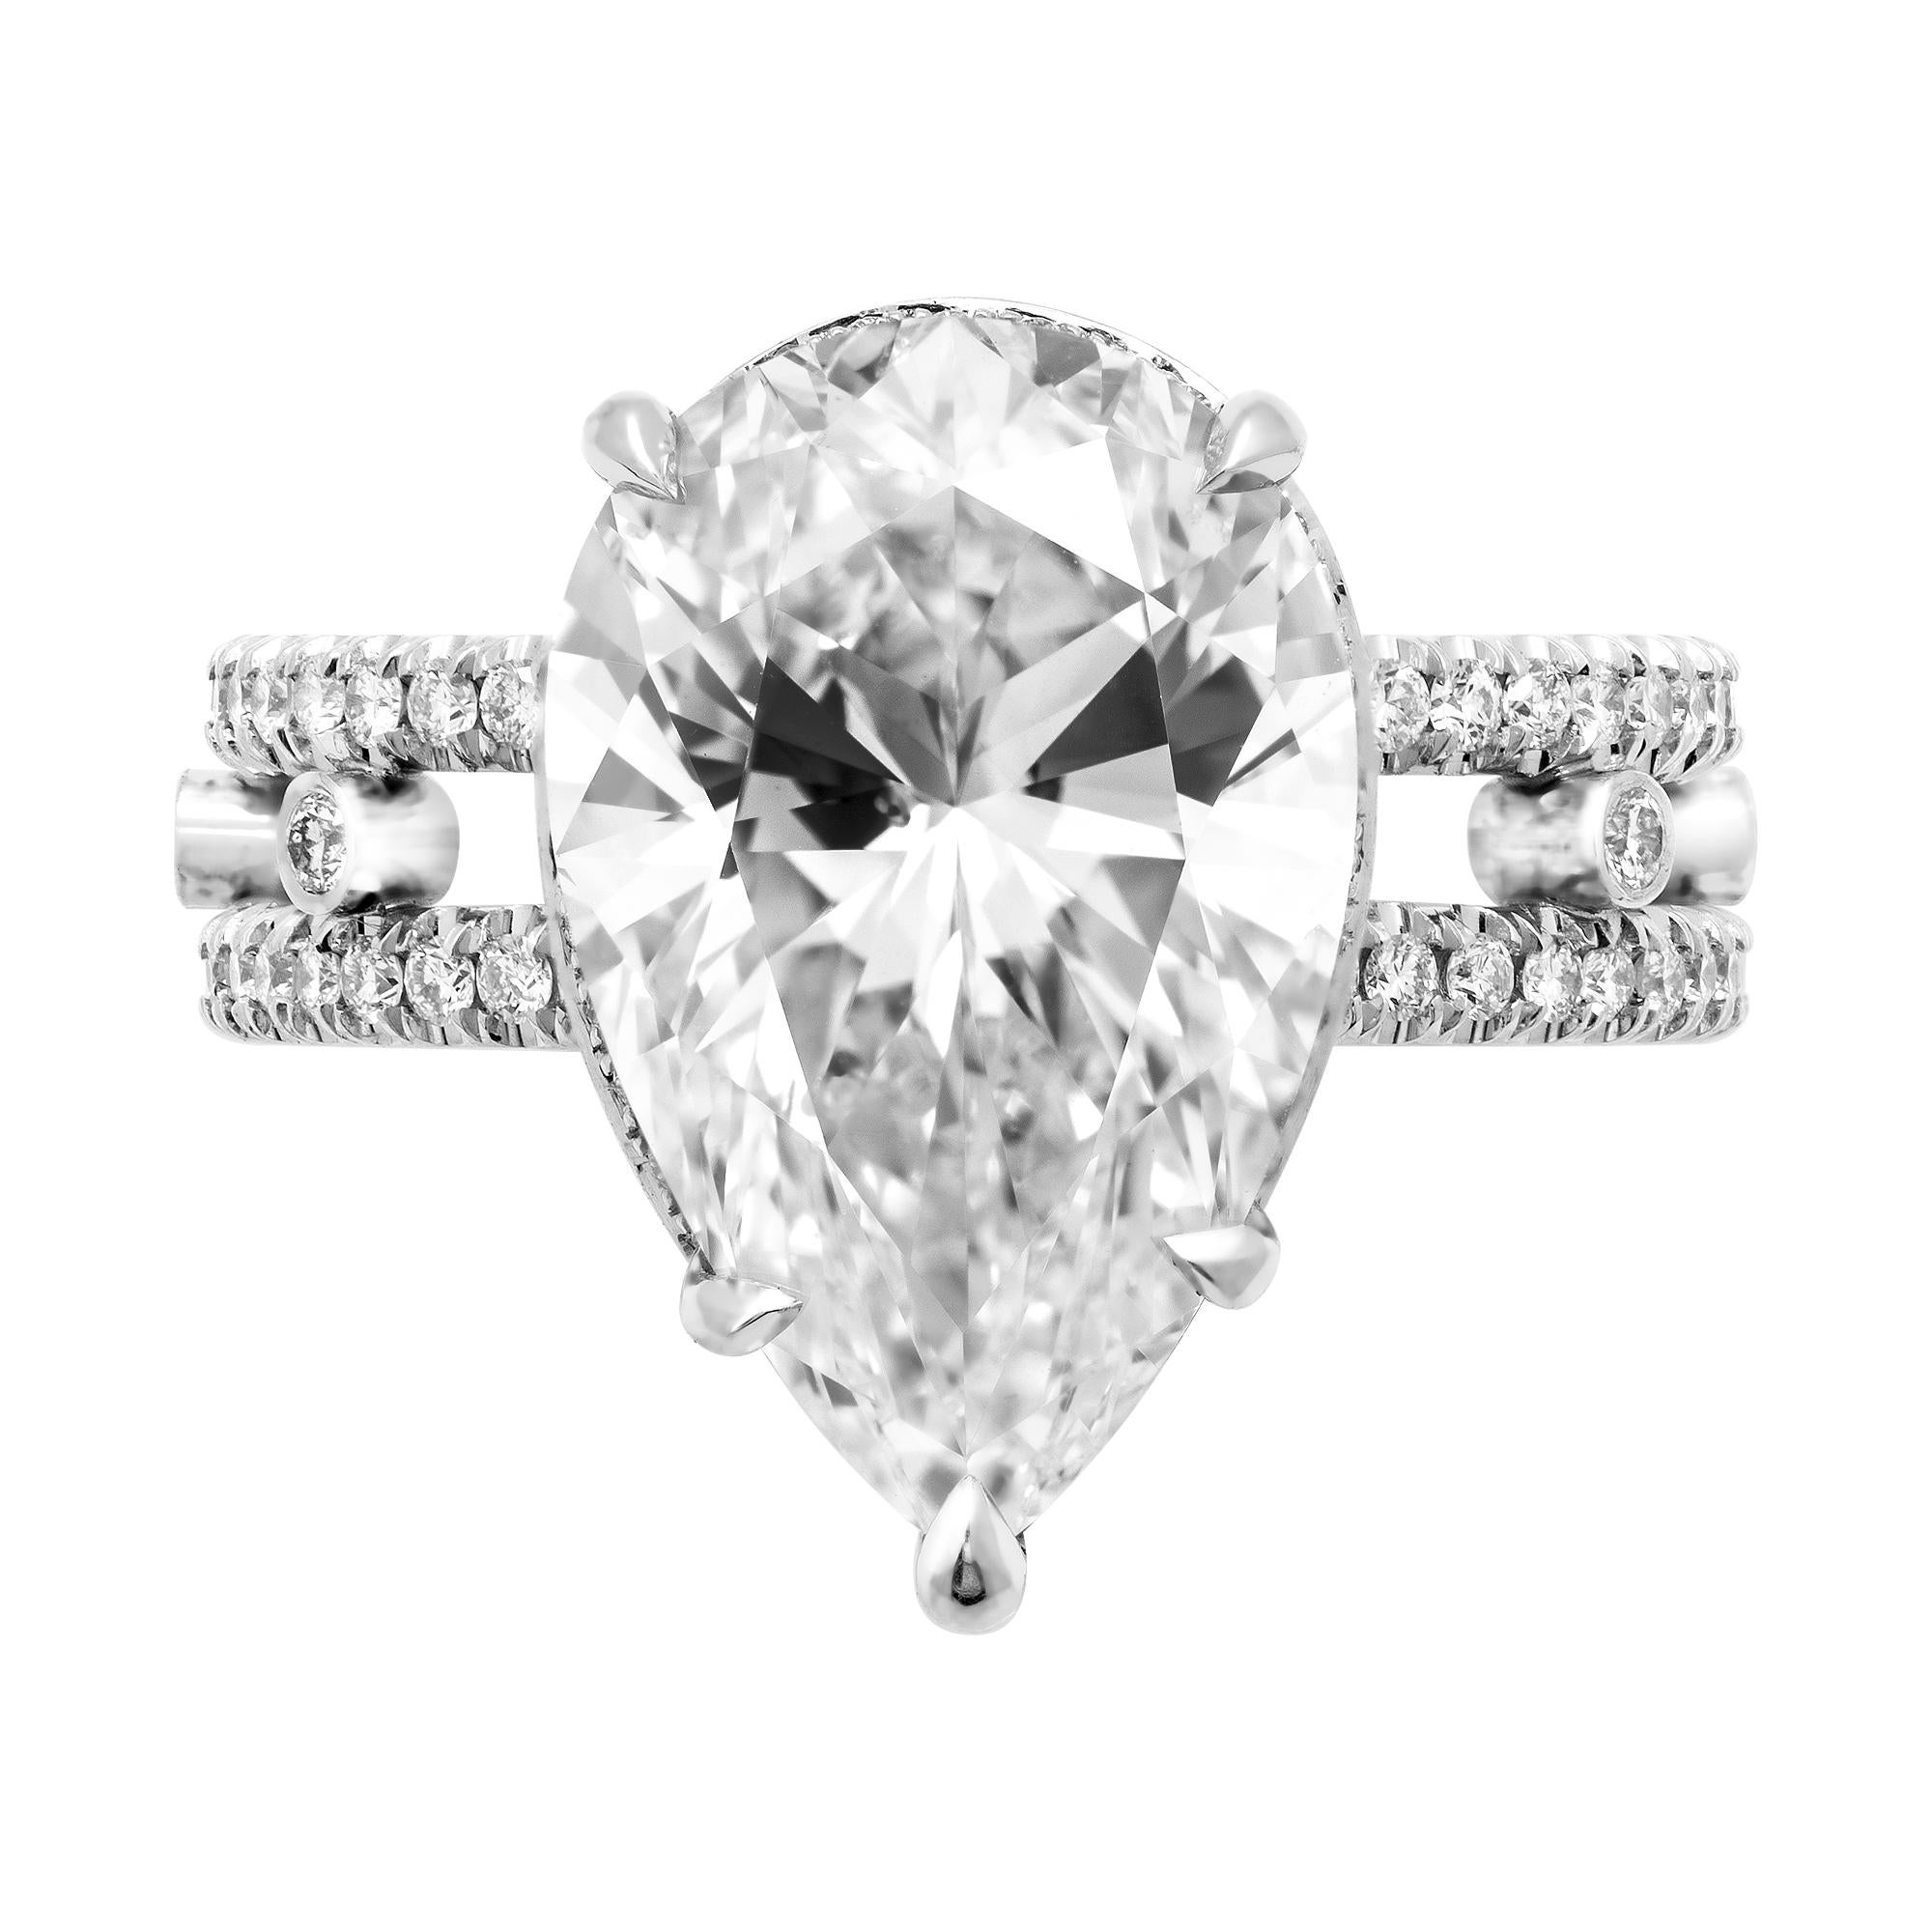 A Magnificent Handmade Engagement Platinum Ring with GIA Certified 6.02CT Pear Shaped Center Diamond in K color SI1 clarity (Faces up White because to Medium Fluorescence and due to the large size, eye Clear).
 The Measurements of the Diamond are